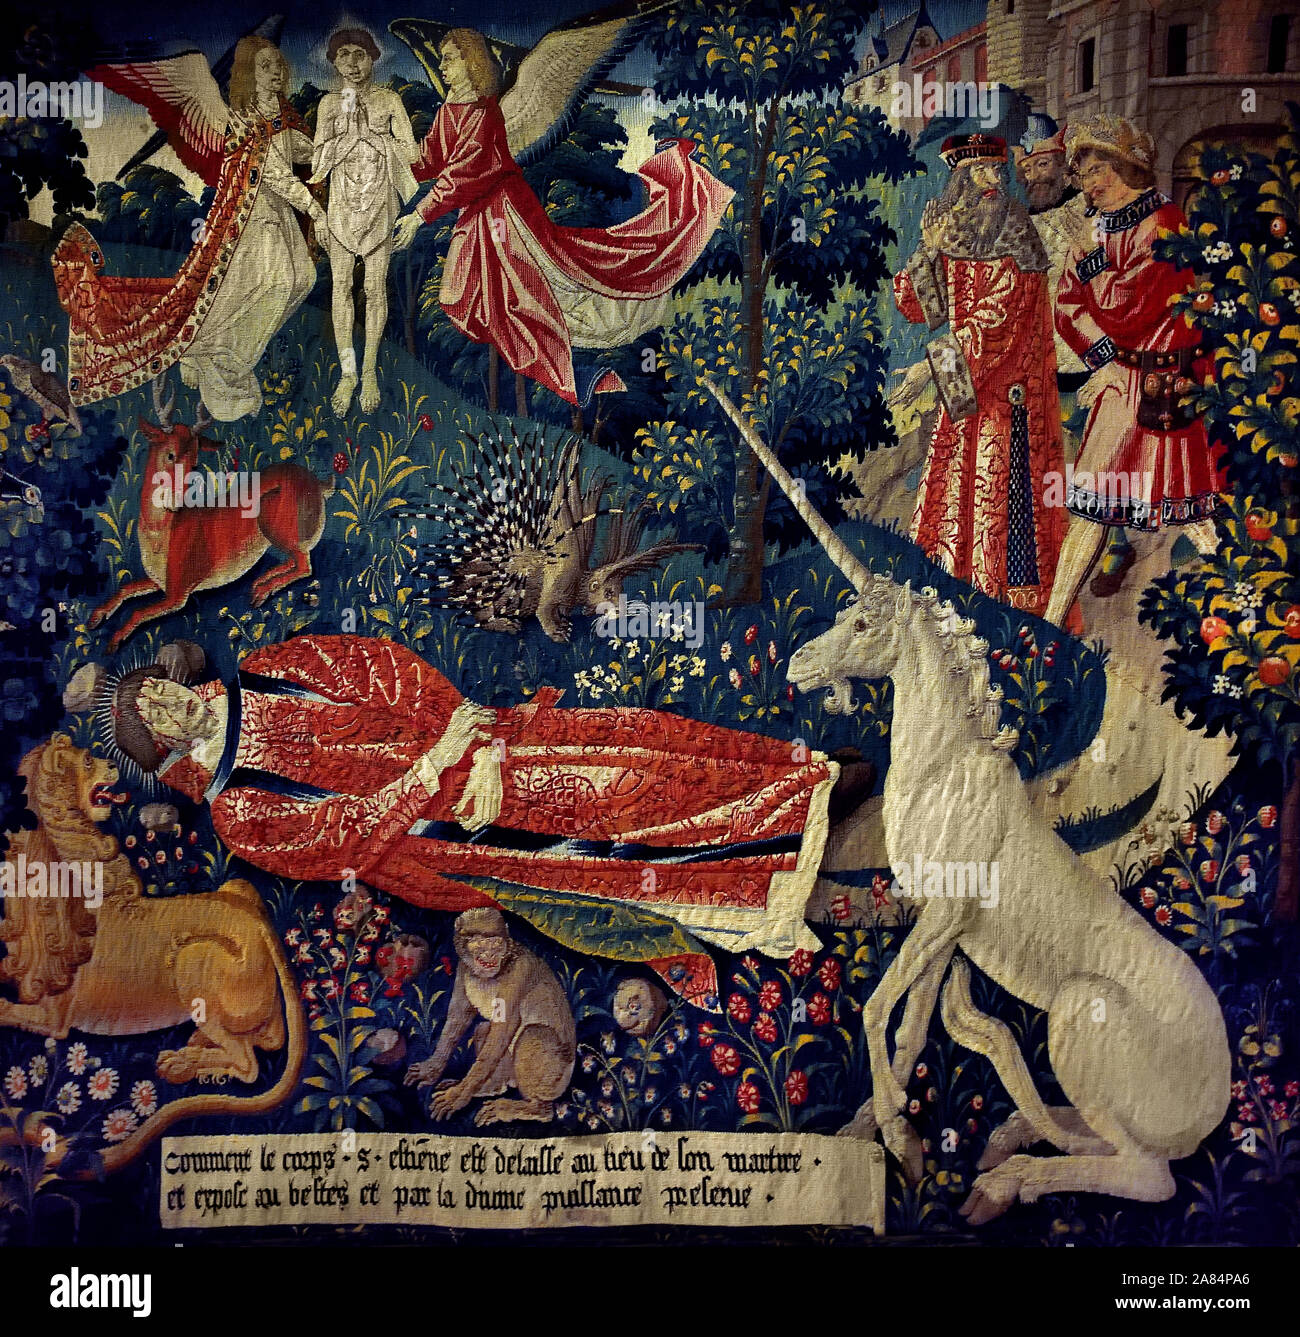 Medieval Wall Tapestry High Resolution Stock Photography And Images Alamy See more ideas about medieval tapestry, medieval, tapestry. https www alamy com st stephens wall hanging wild animals pay their respects to the body of st stephen tapestry with woollen and silk thread 1500 15th cent from the lady and the unicorn series wool and silk cluny museum parisnational museum of the middle ages france french image332019582 html